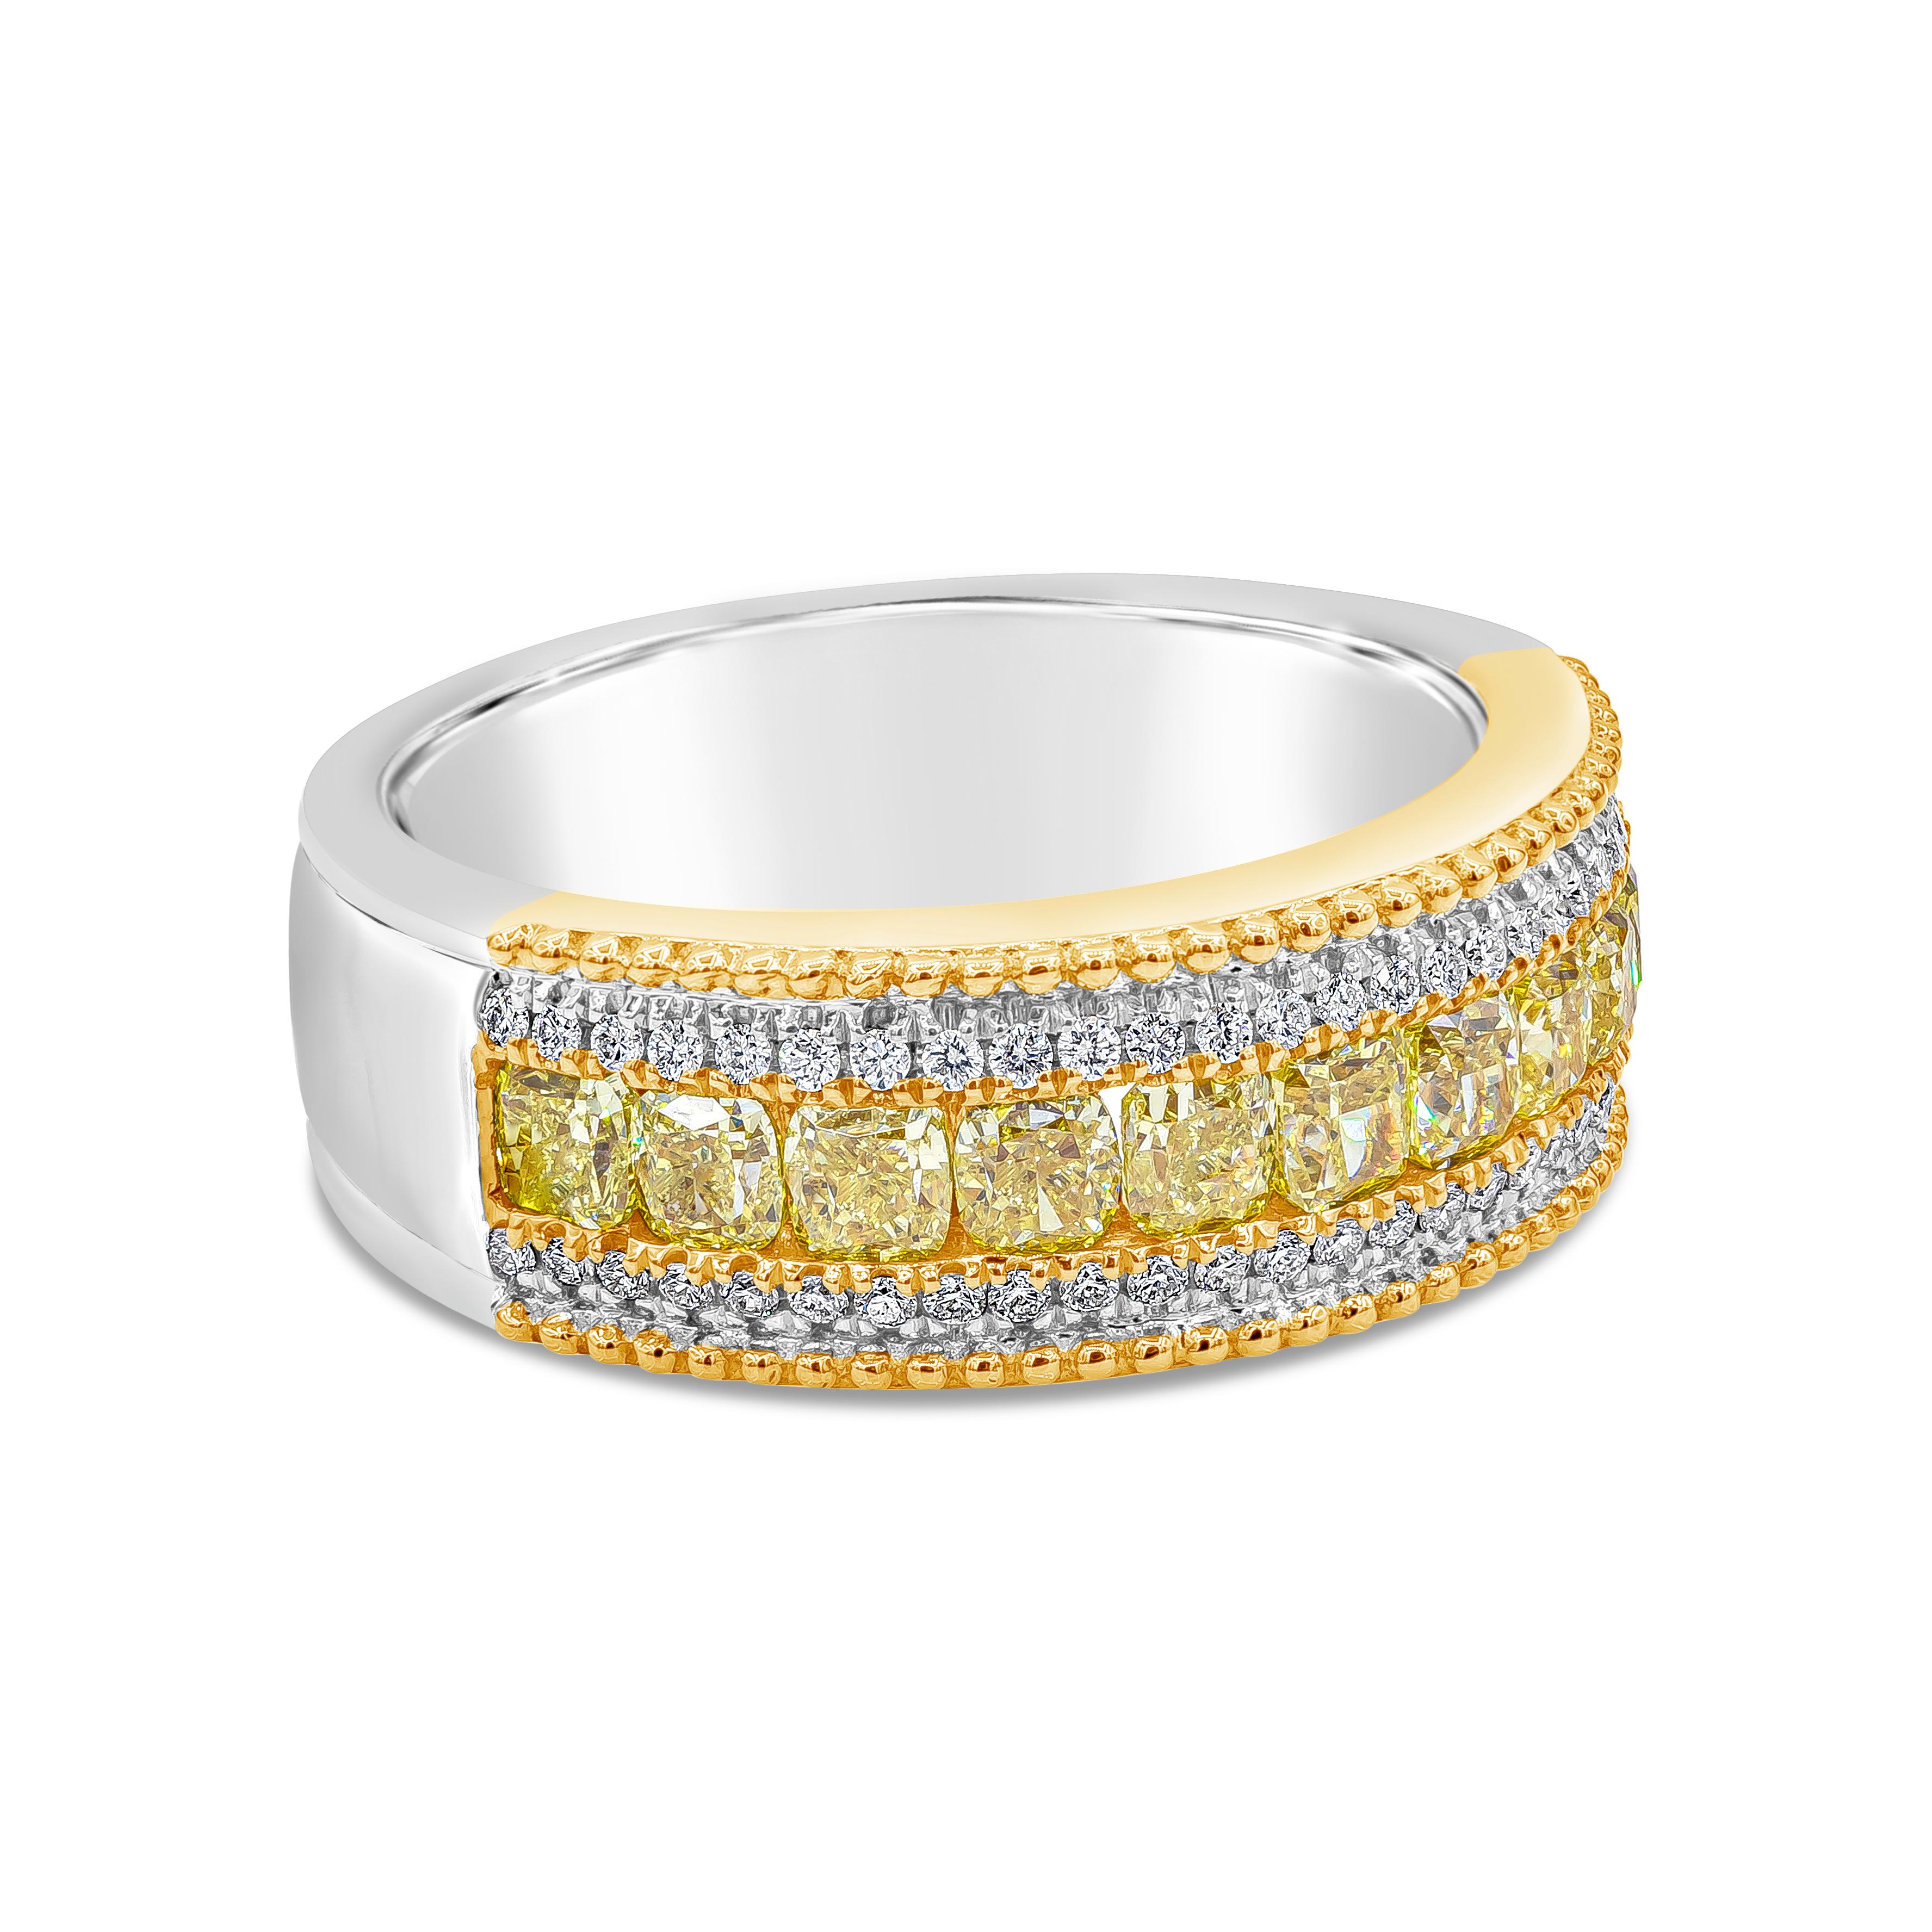 A unique and fashionable ring showcasing a row of cushion cut Fancy Yellow diamonds weighing 1.42 carats total. Channel set between round brilliant diamonds  weighing 0.18 carats total. Finished with beaded edges, made with 18K White and Yellow